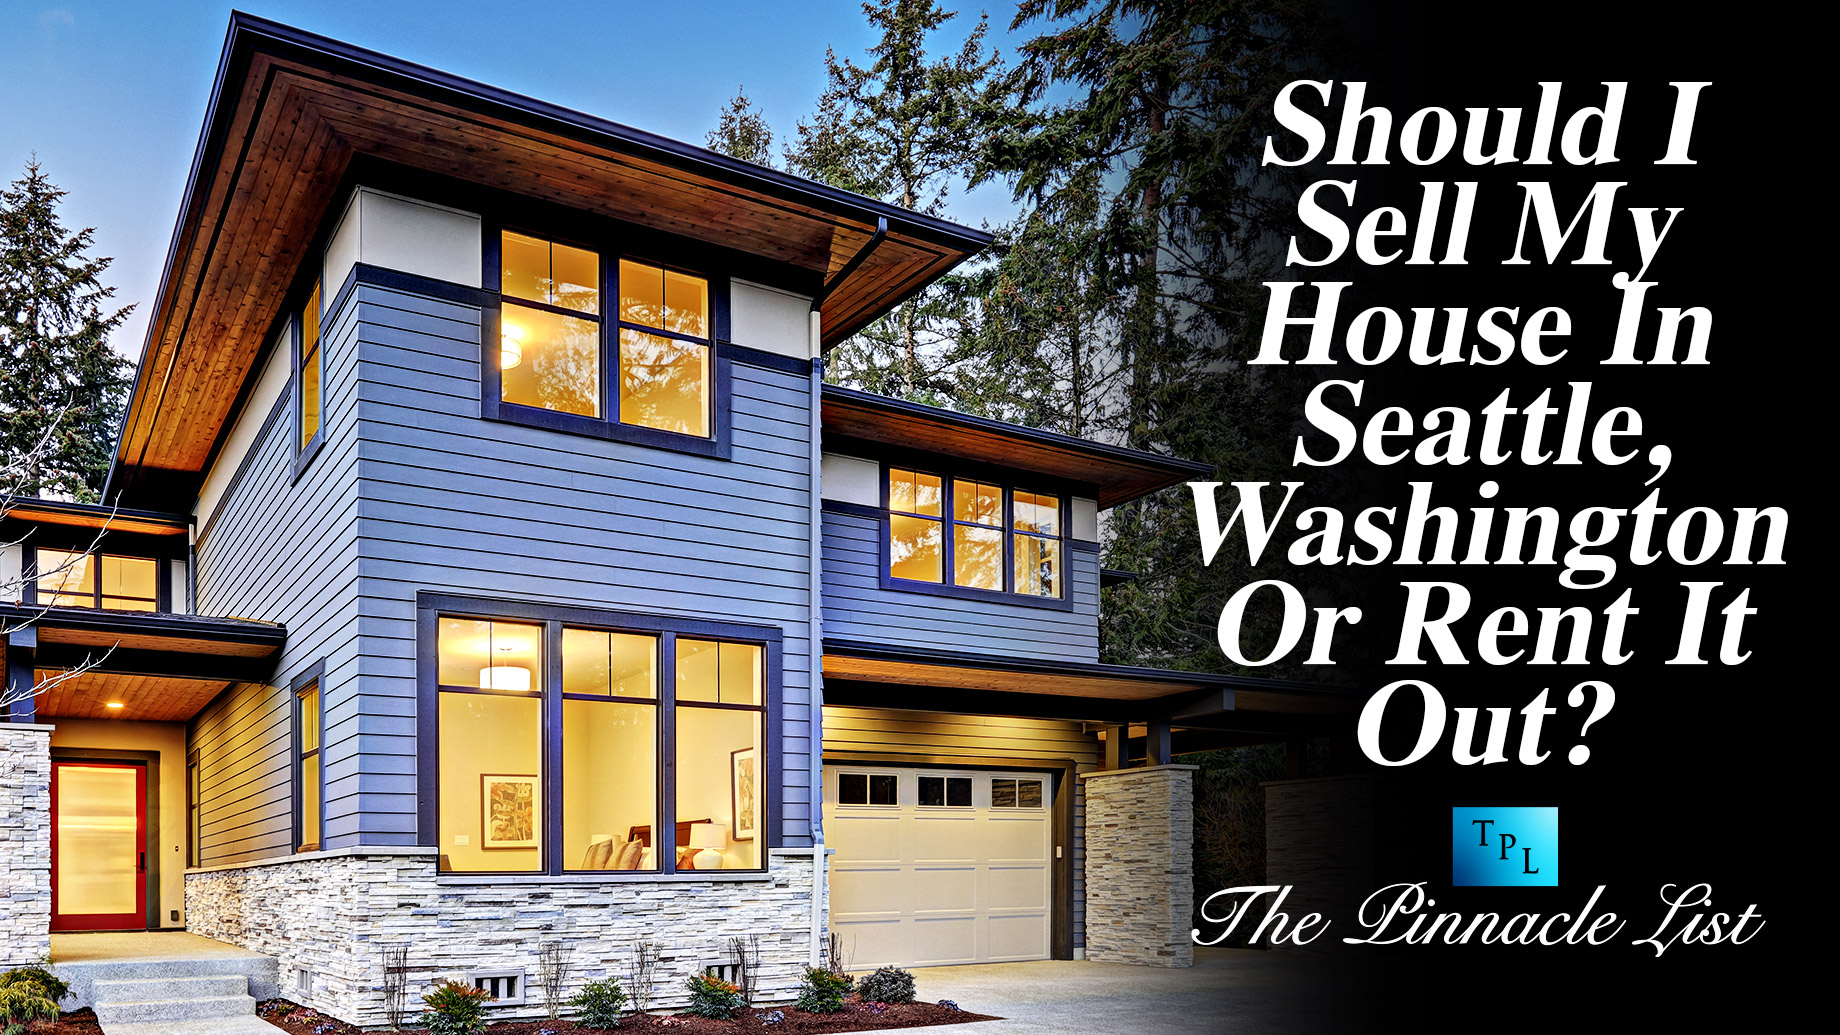 Should I Sell My House In Seattle, Washington Or Rent It Out?